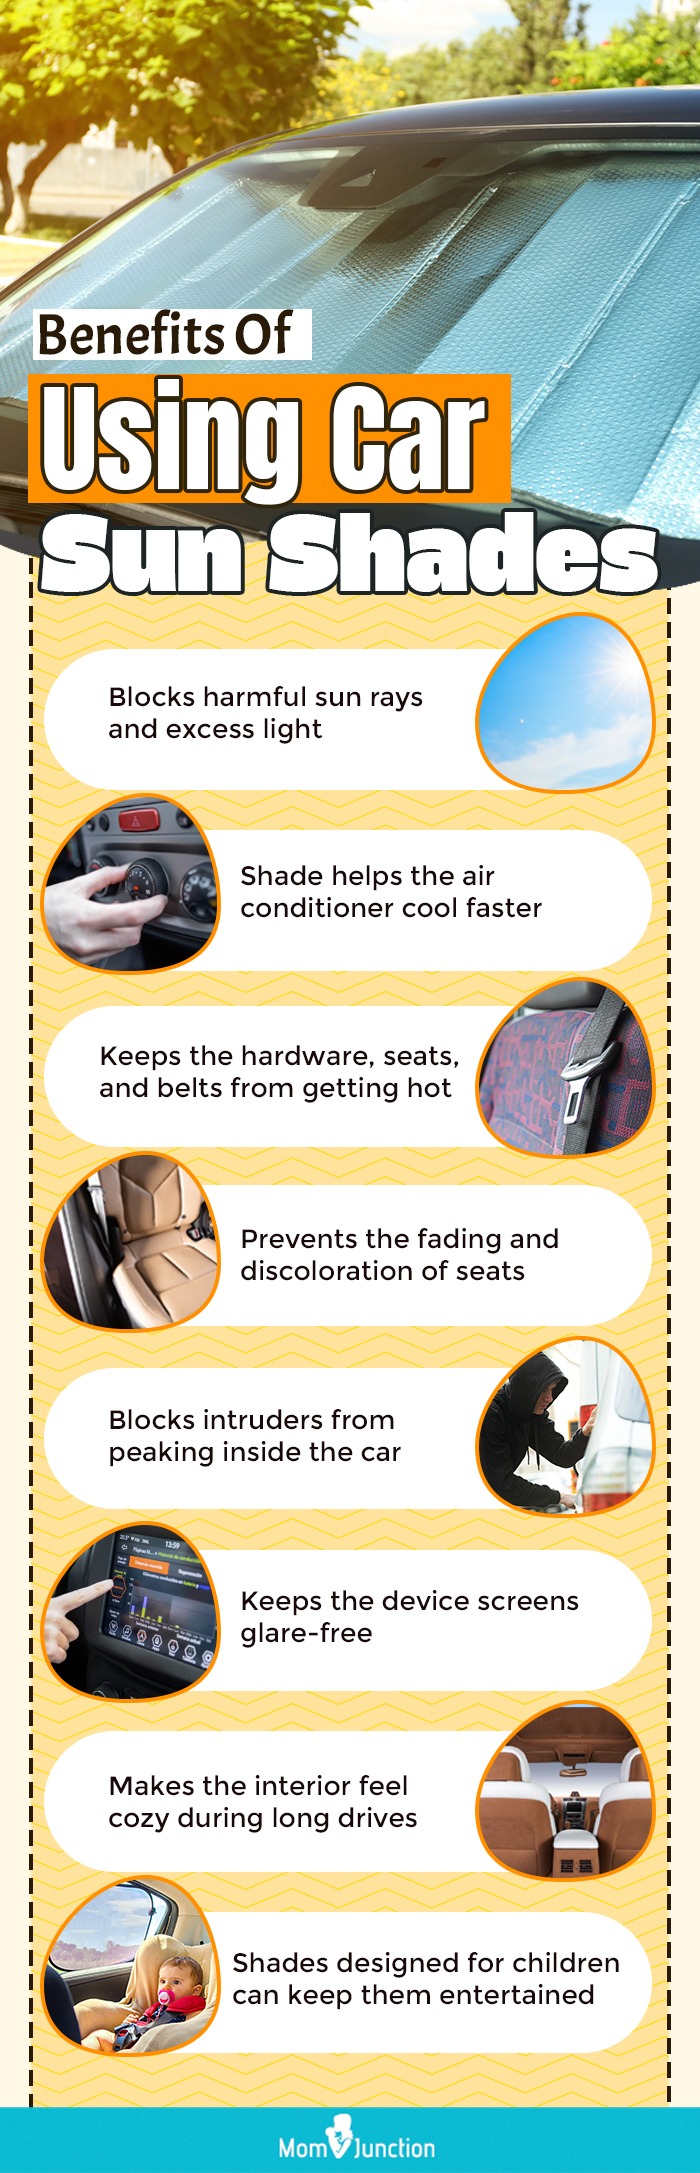 Benefits Of Using Car Sun Shades (infographic)